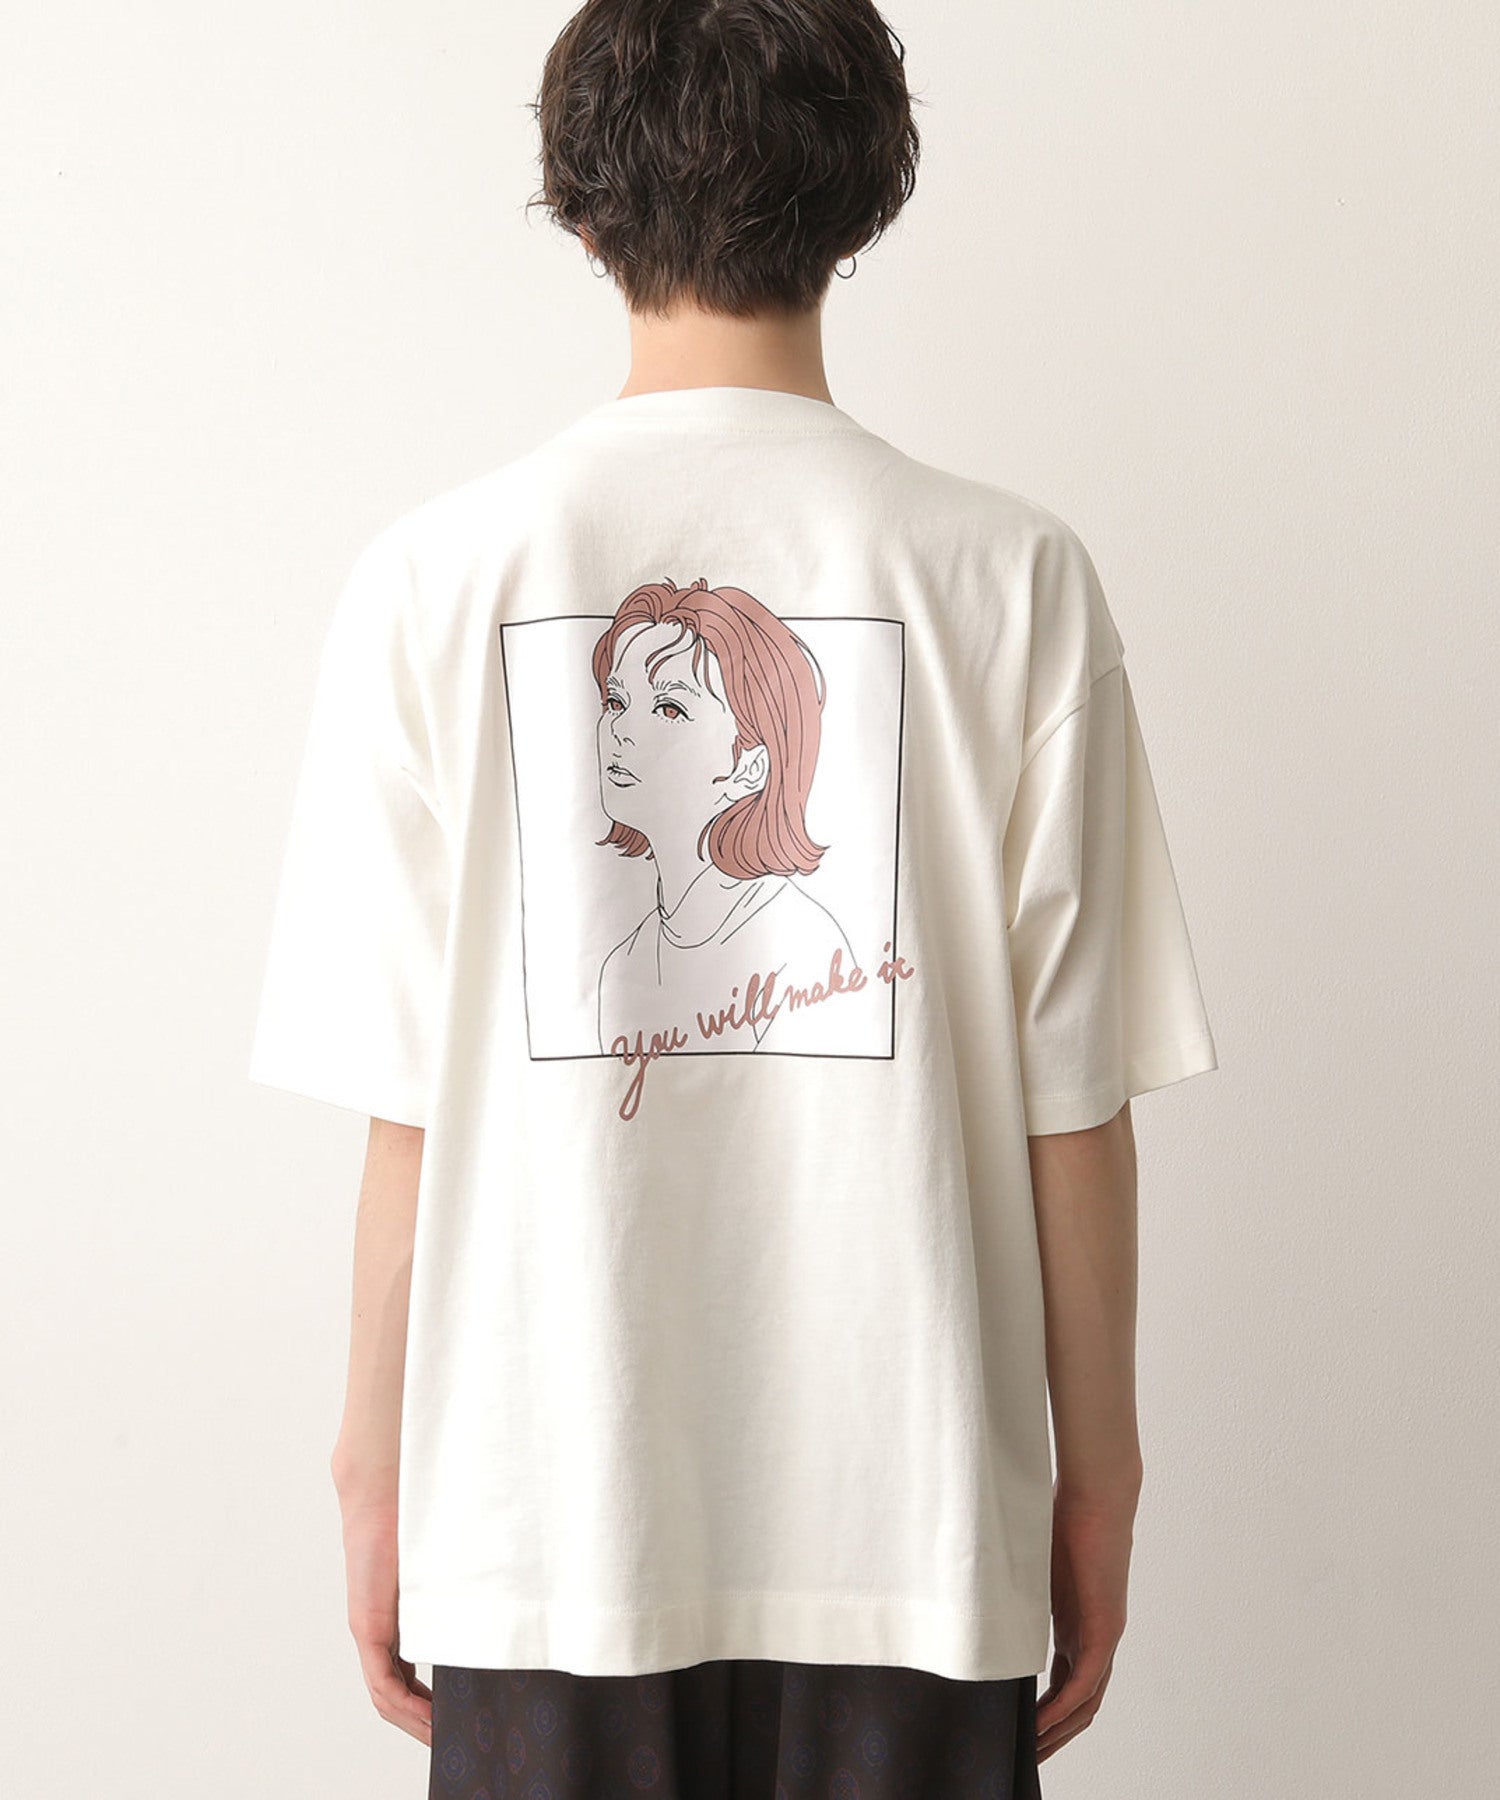 Junred ガールズボックスtee トップス Tシャツ カットソー 通販 J Adore Jun Online